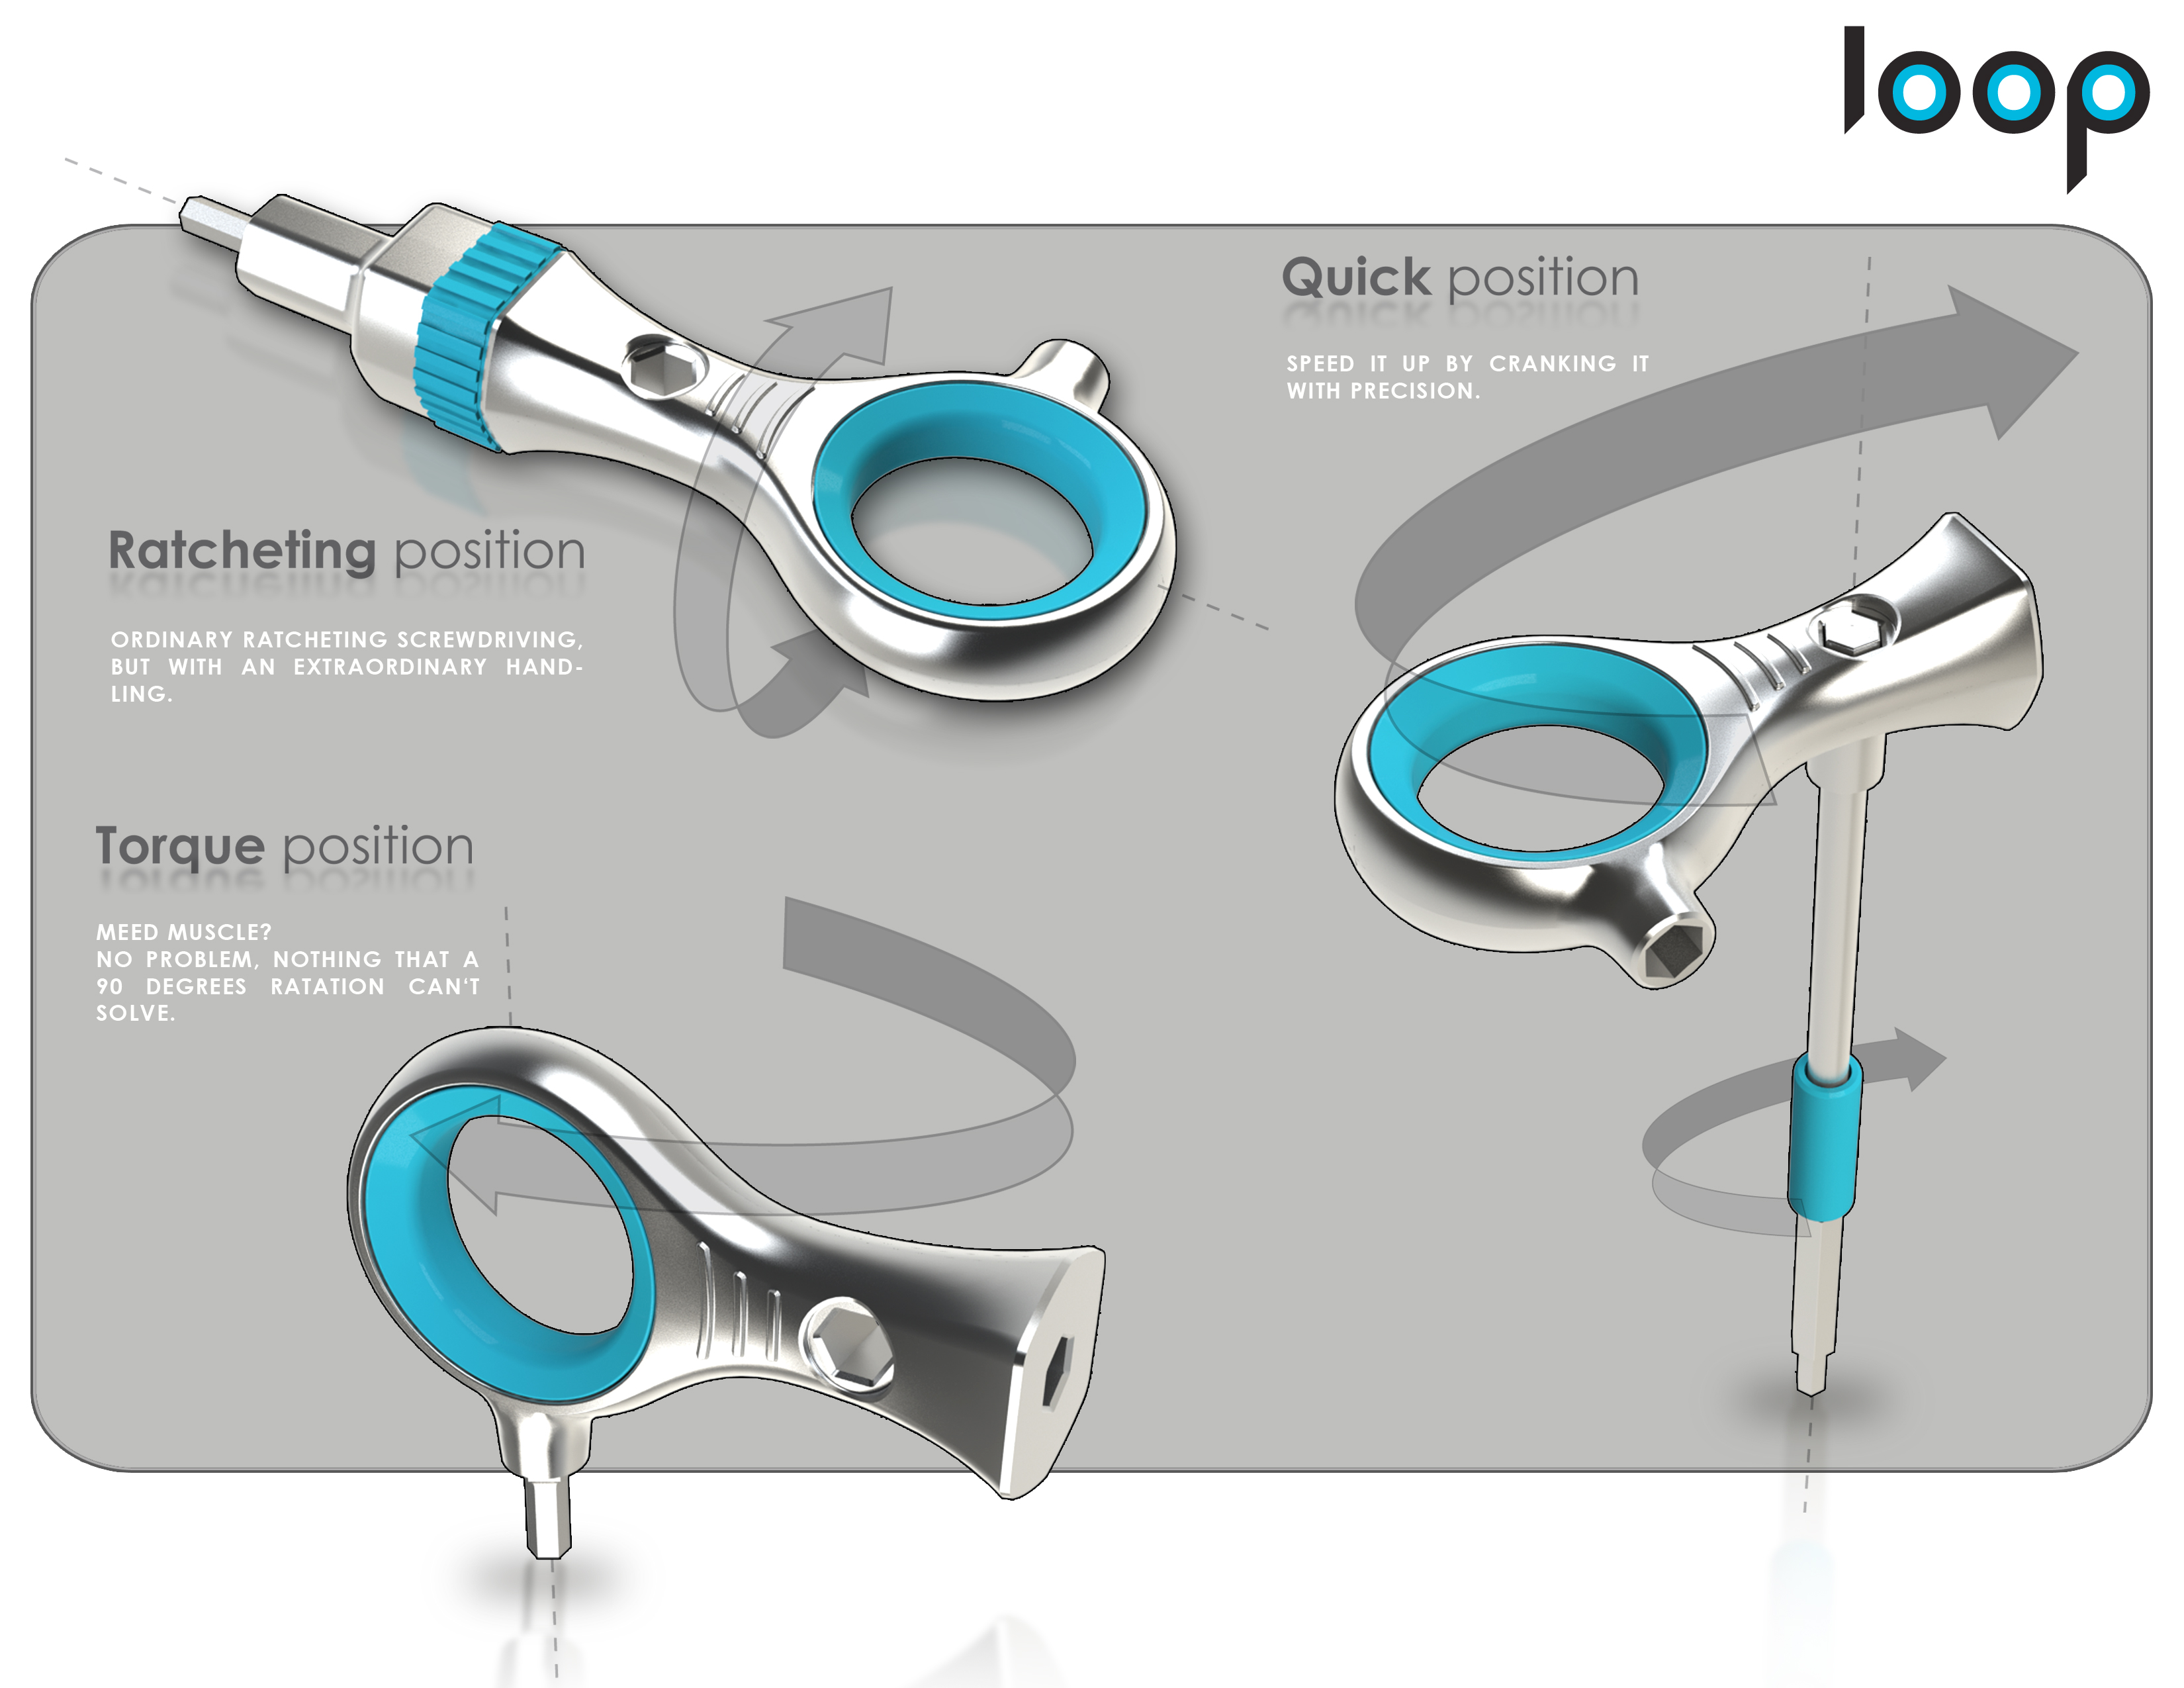 Product feasibility studies are a crucial step. This image shows a ratchet design we tested in 3 different positions.